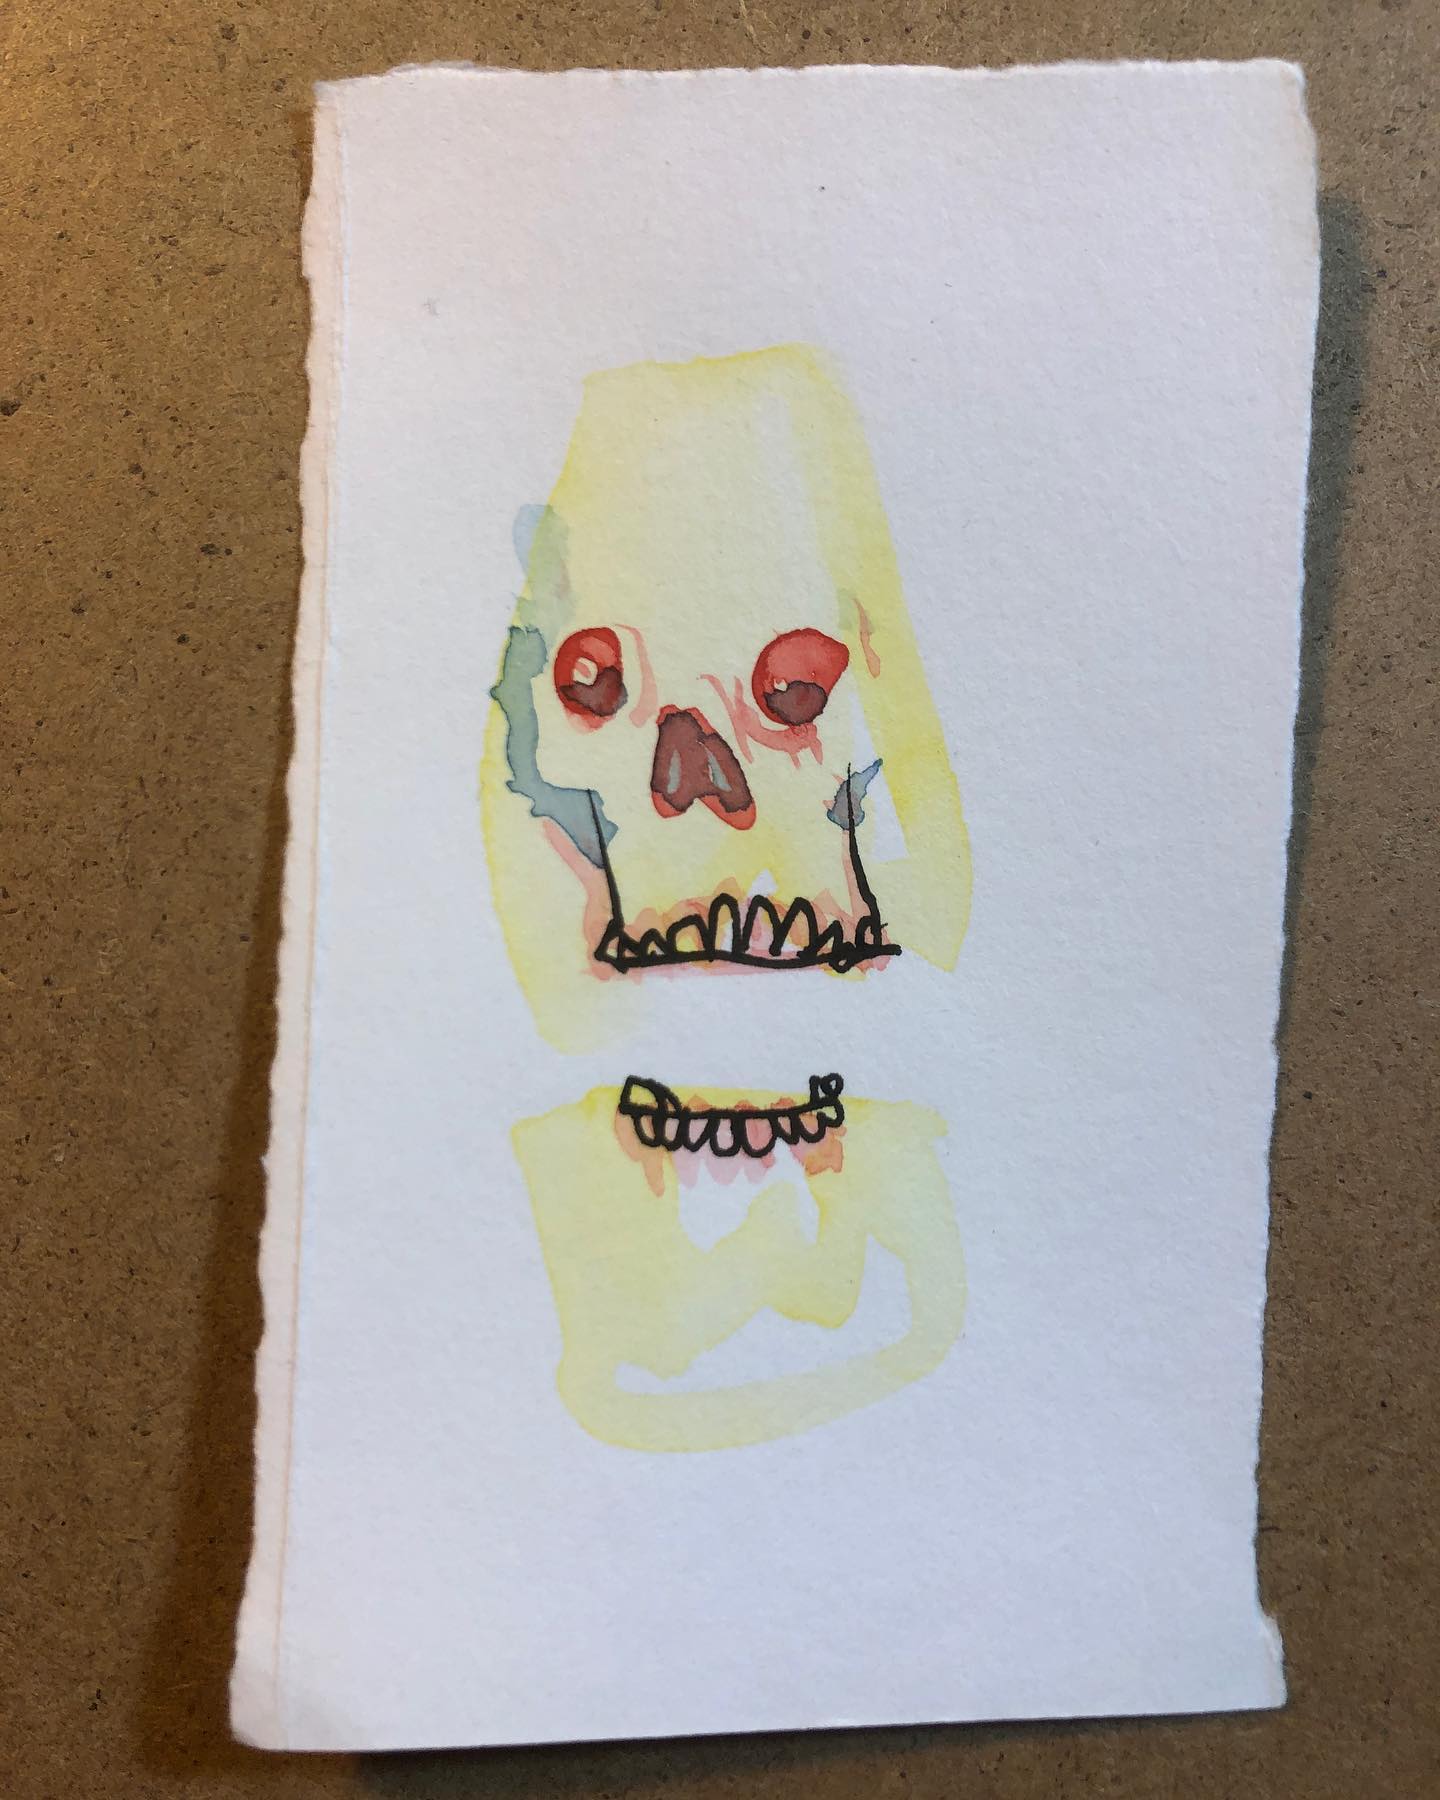 Some Teetheses - ink and watercolor drawing of a skull with defined teeth